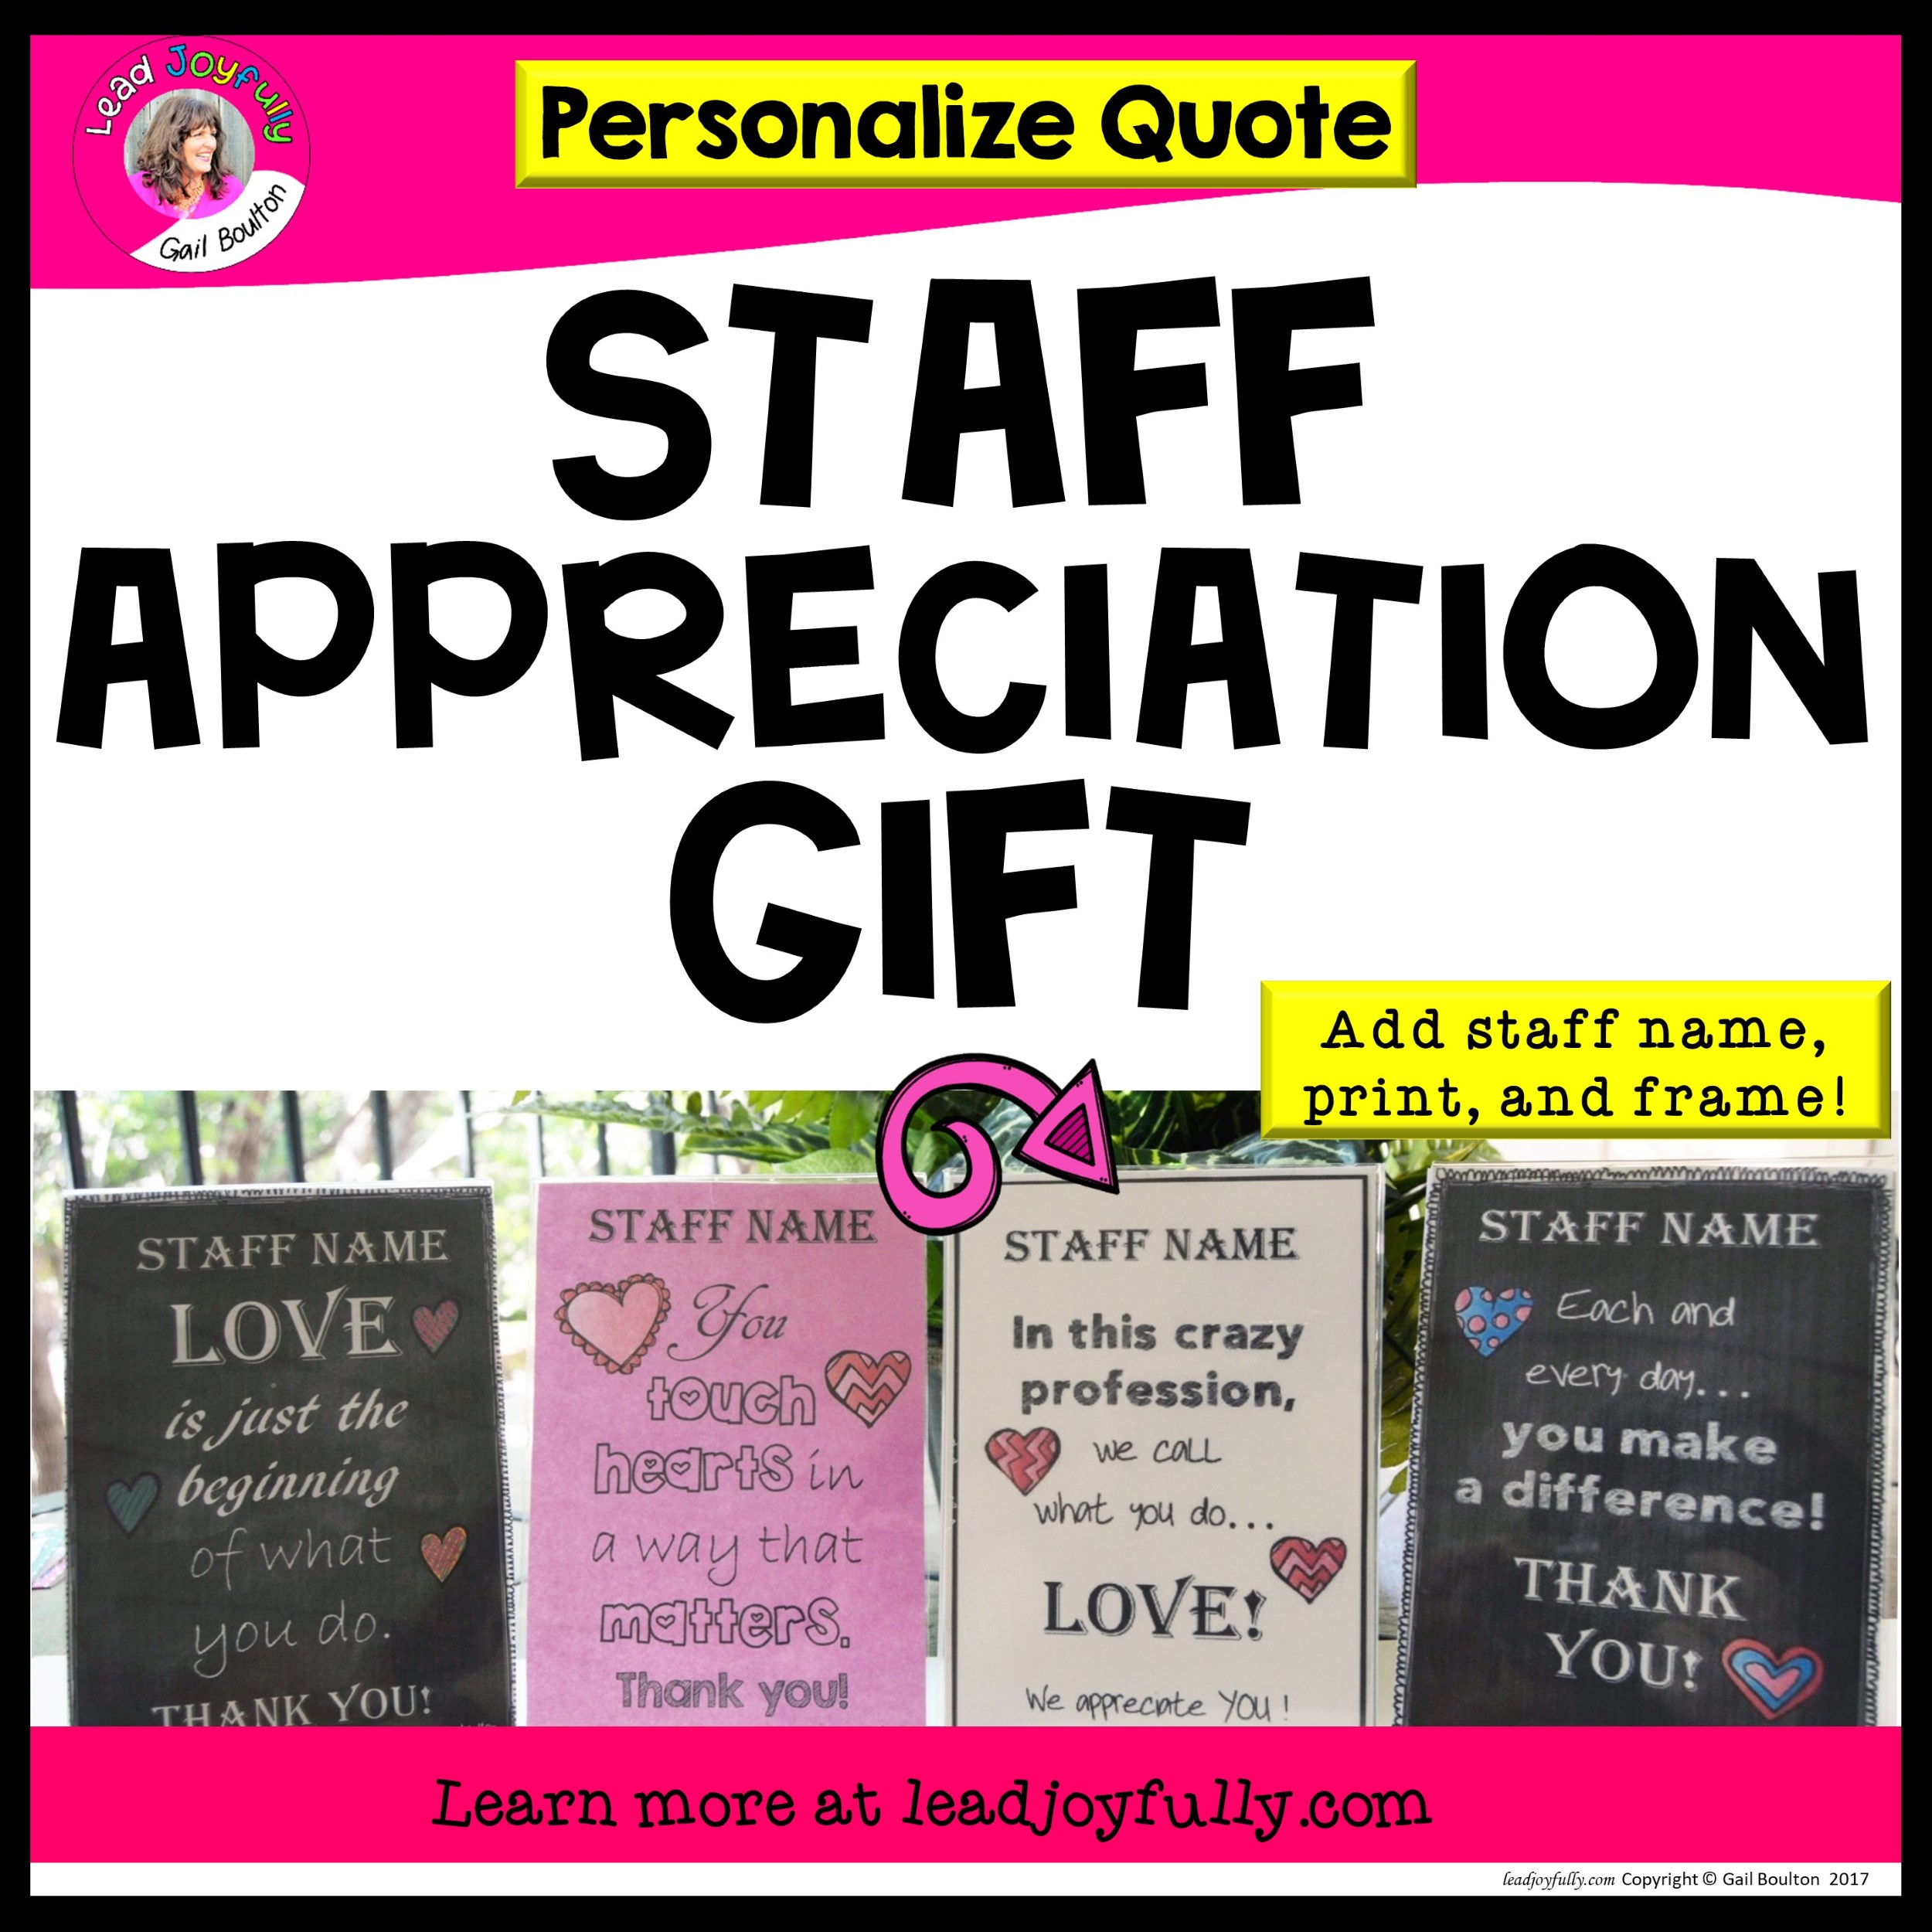 Best Personalized Gift Ideas In 2023 For Any Occasion | Blog | allBambu